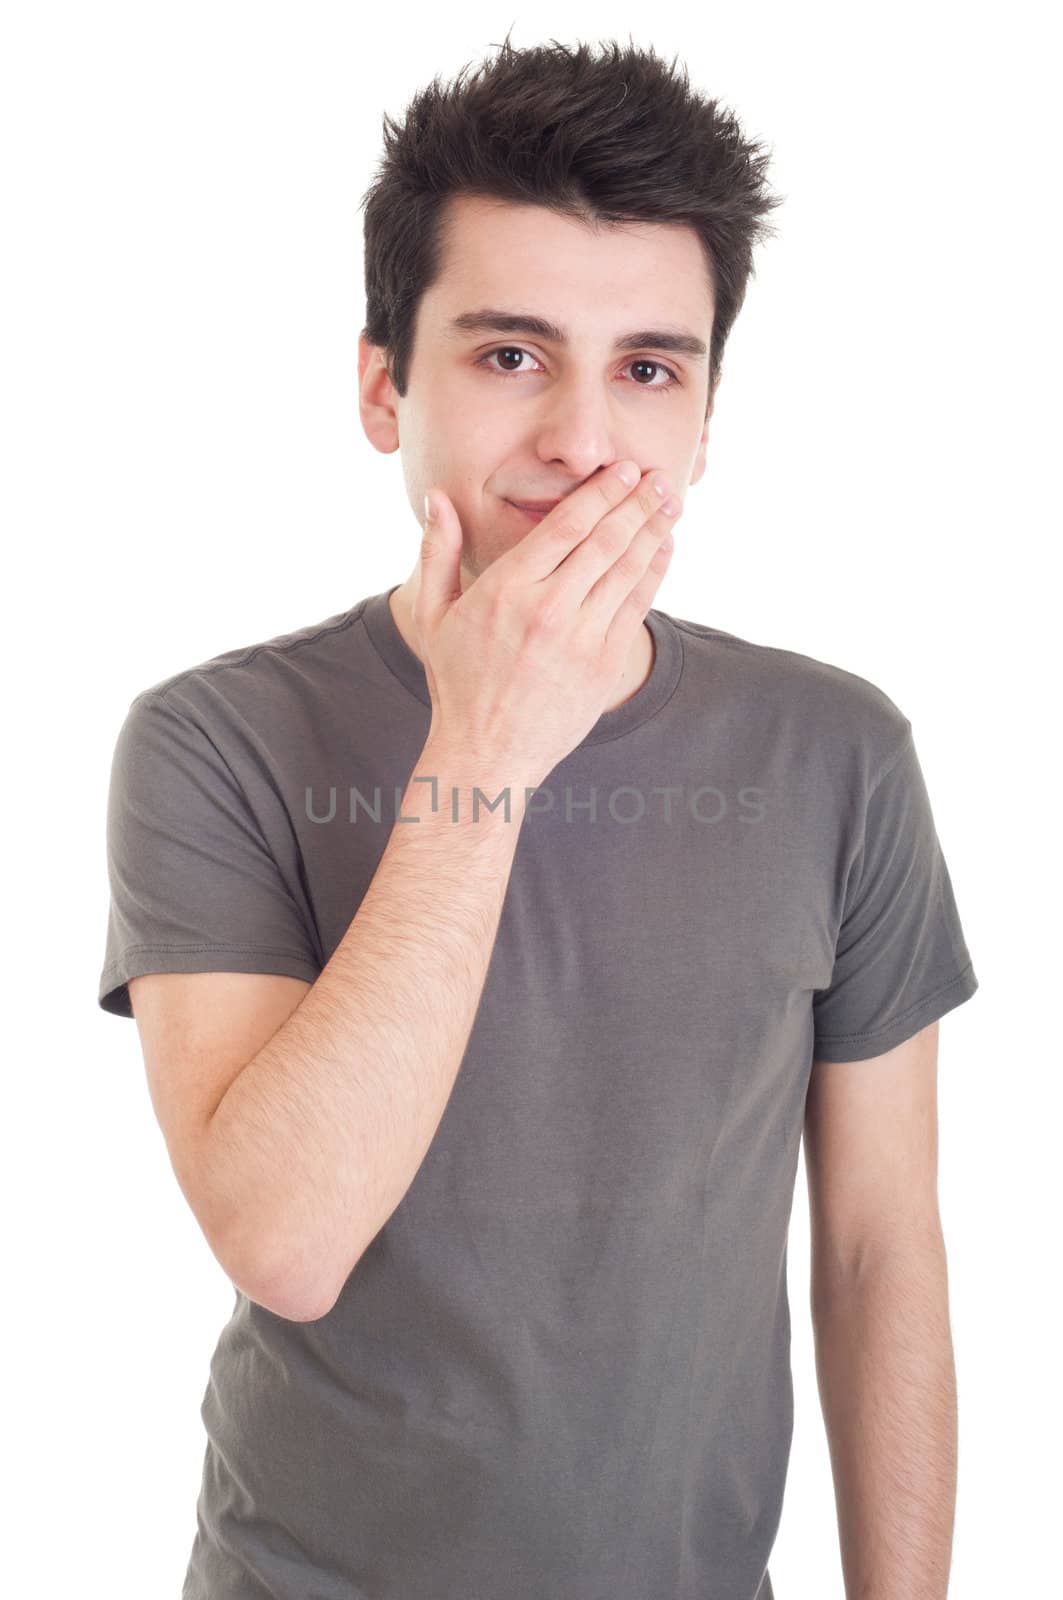 exhausted young man yawning isolated on white background